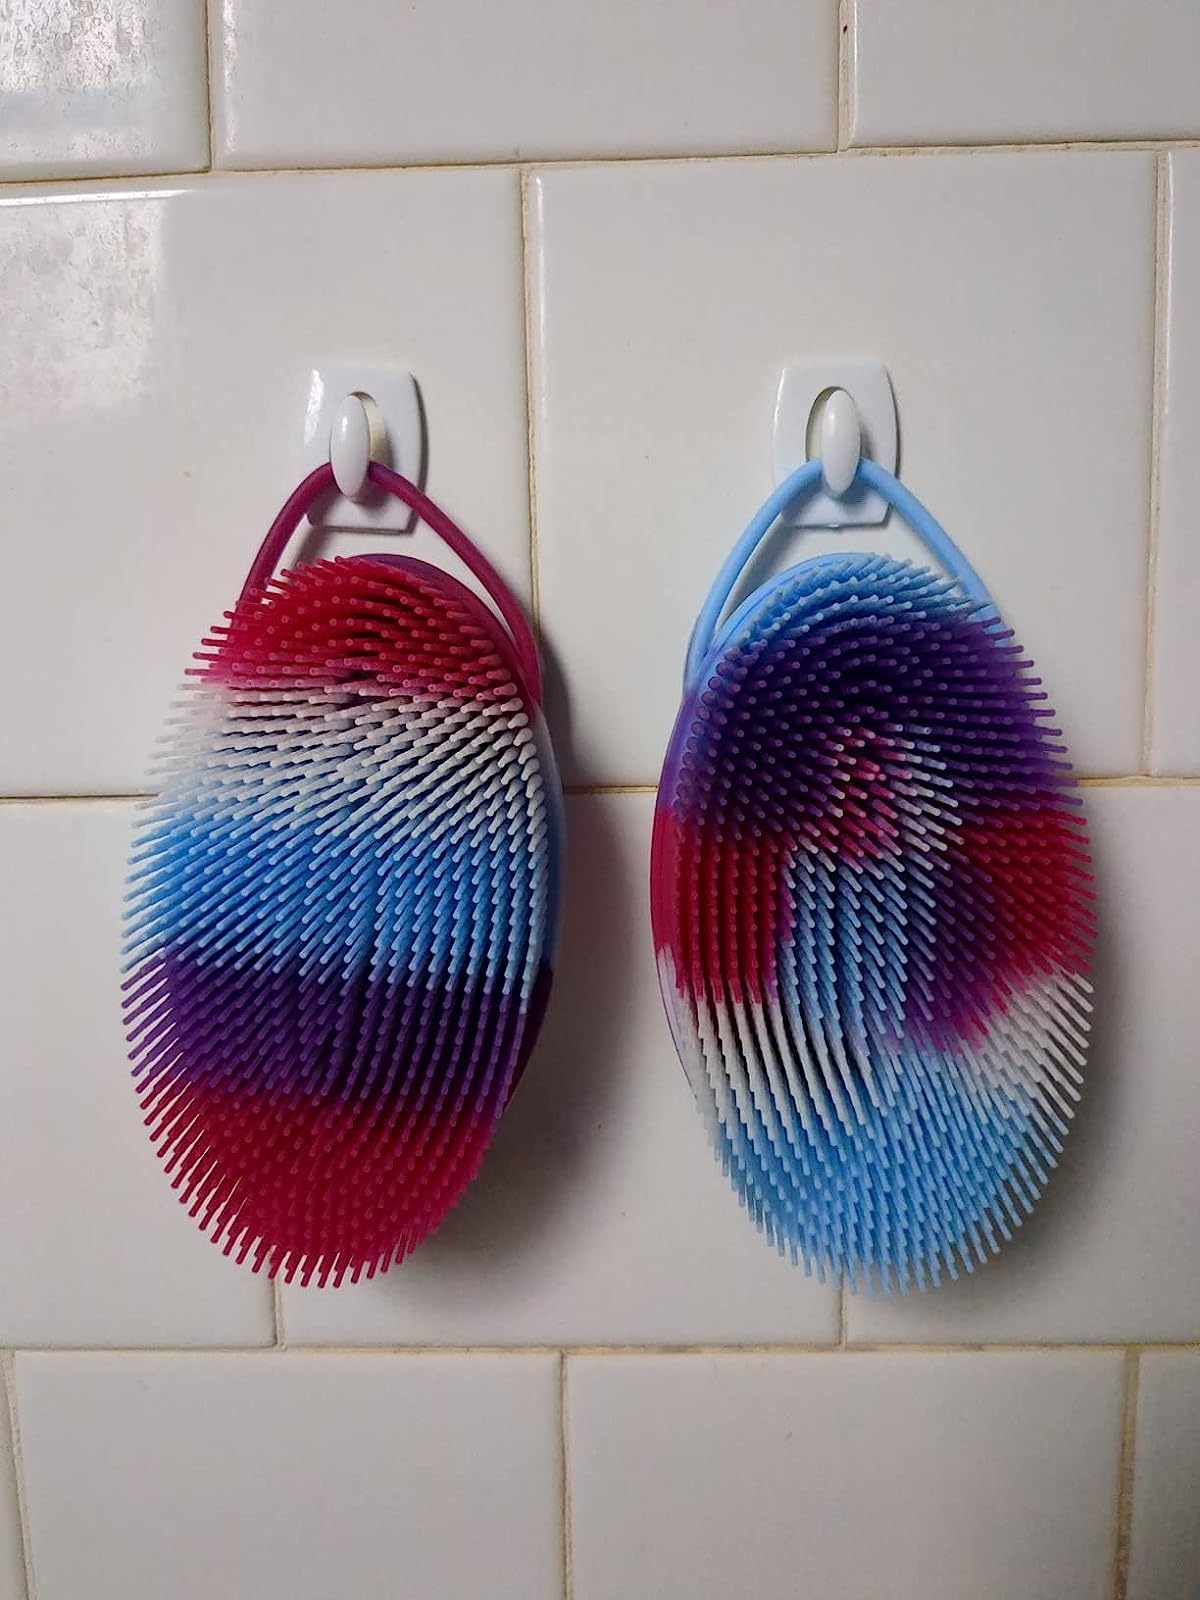 Reviewer image of the brushes hanging up in their shower